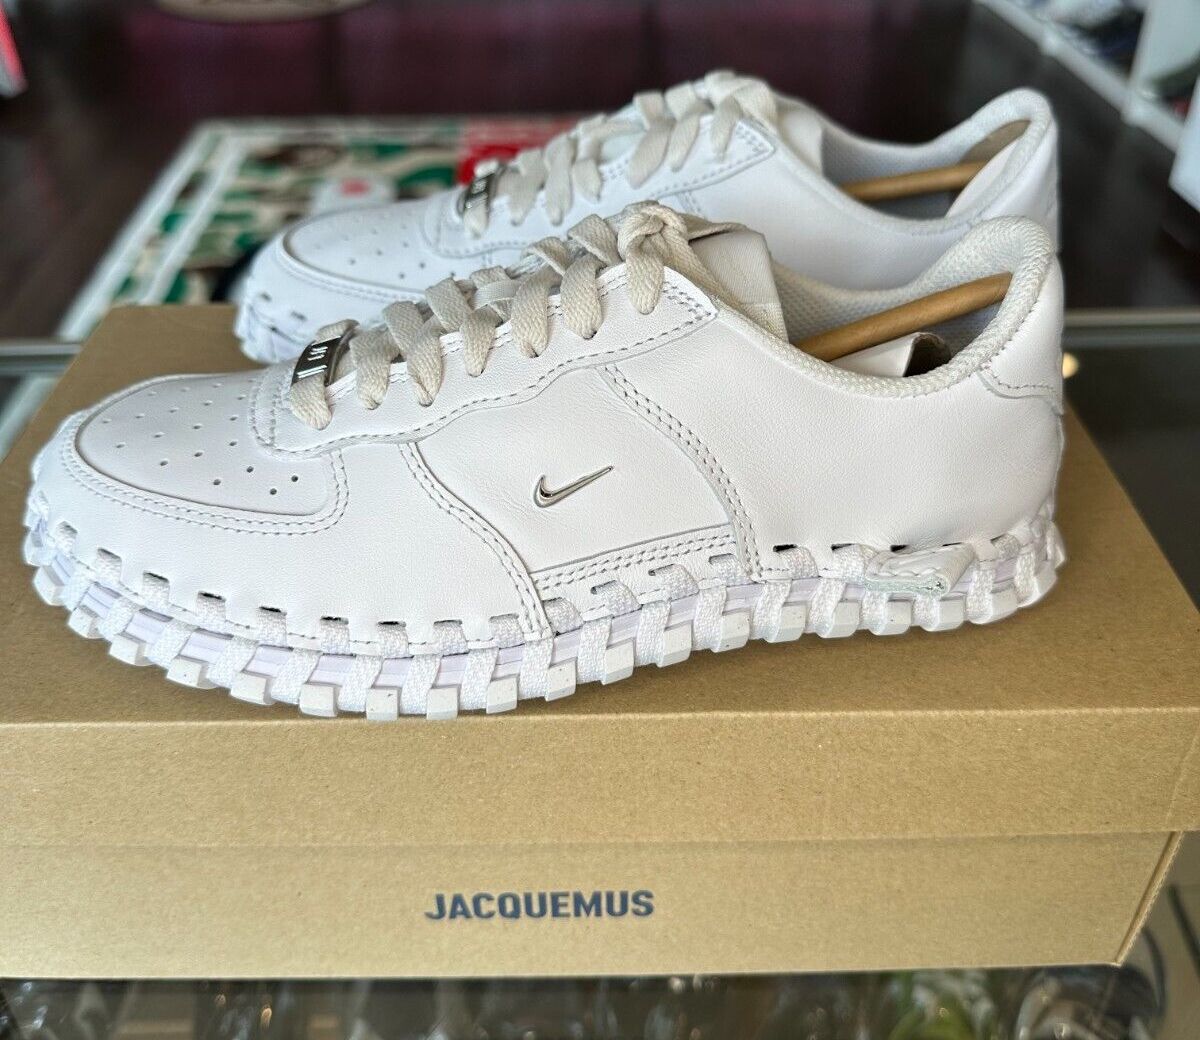 Jacquemus Nike J Force 1 Low White Woven DR0424-100